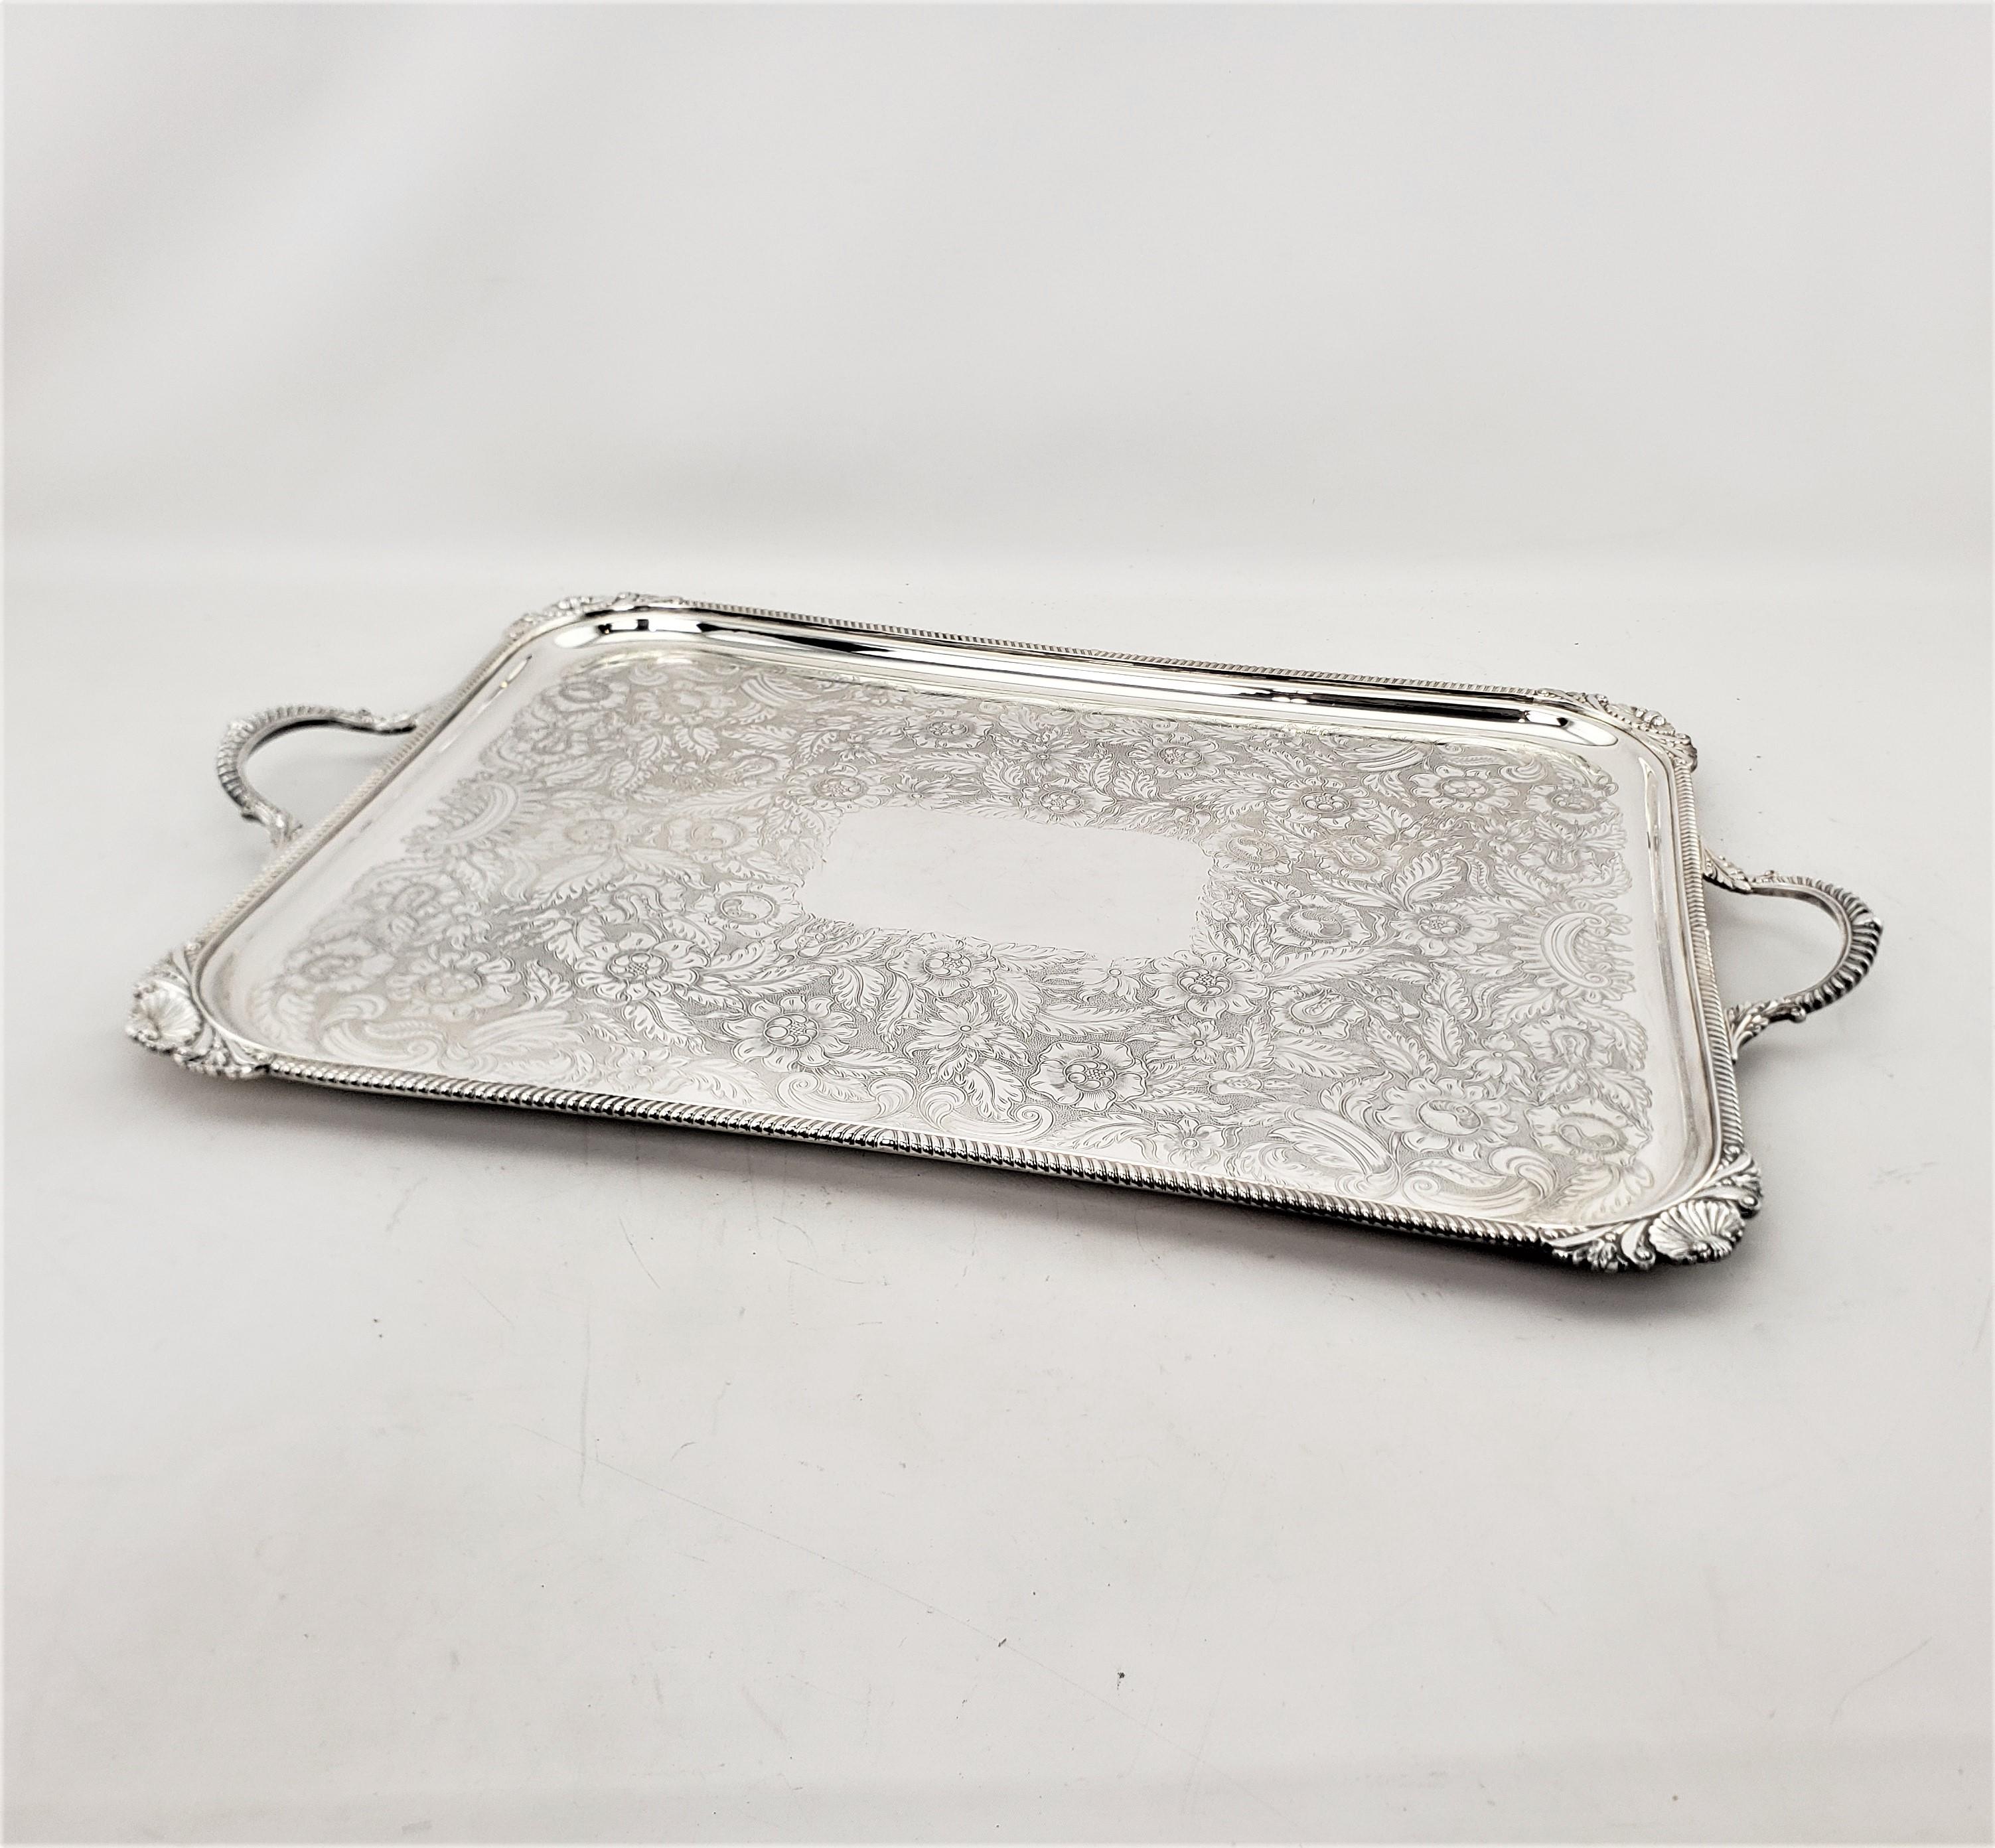 Victorian Antique Birks Large Silver Plated Rectangular Serving Tray with Floral Engraving For Sale